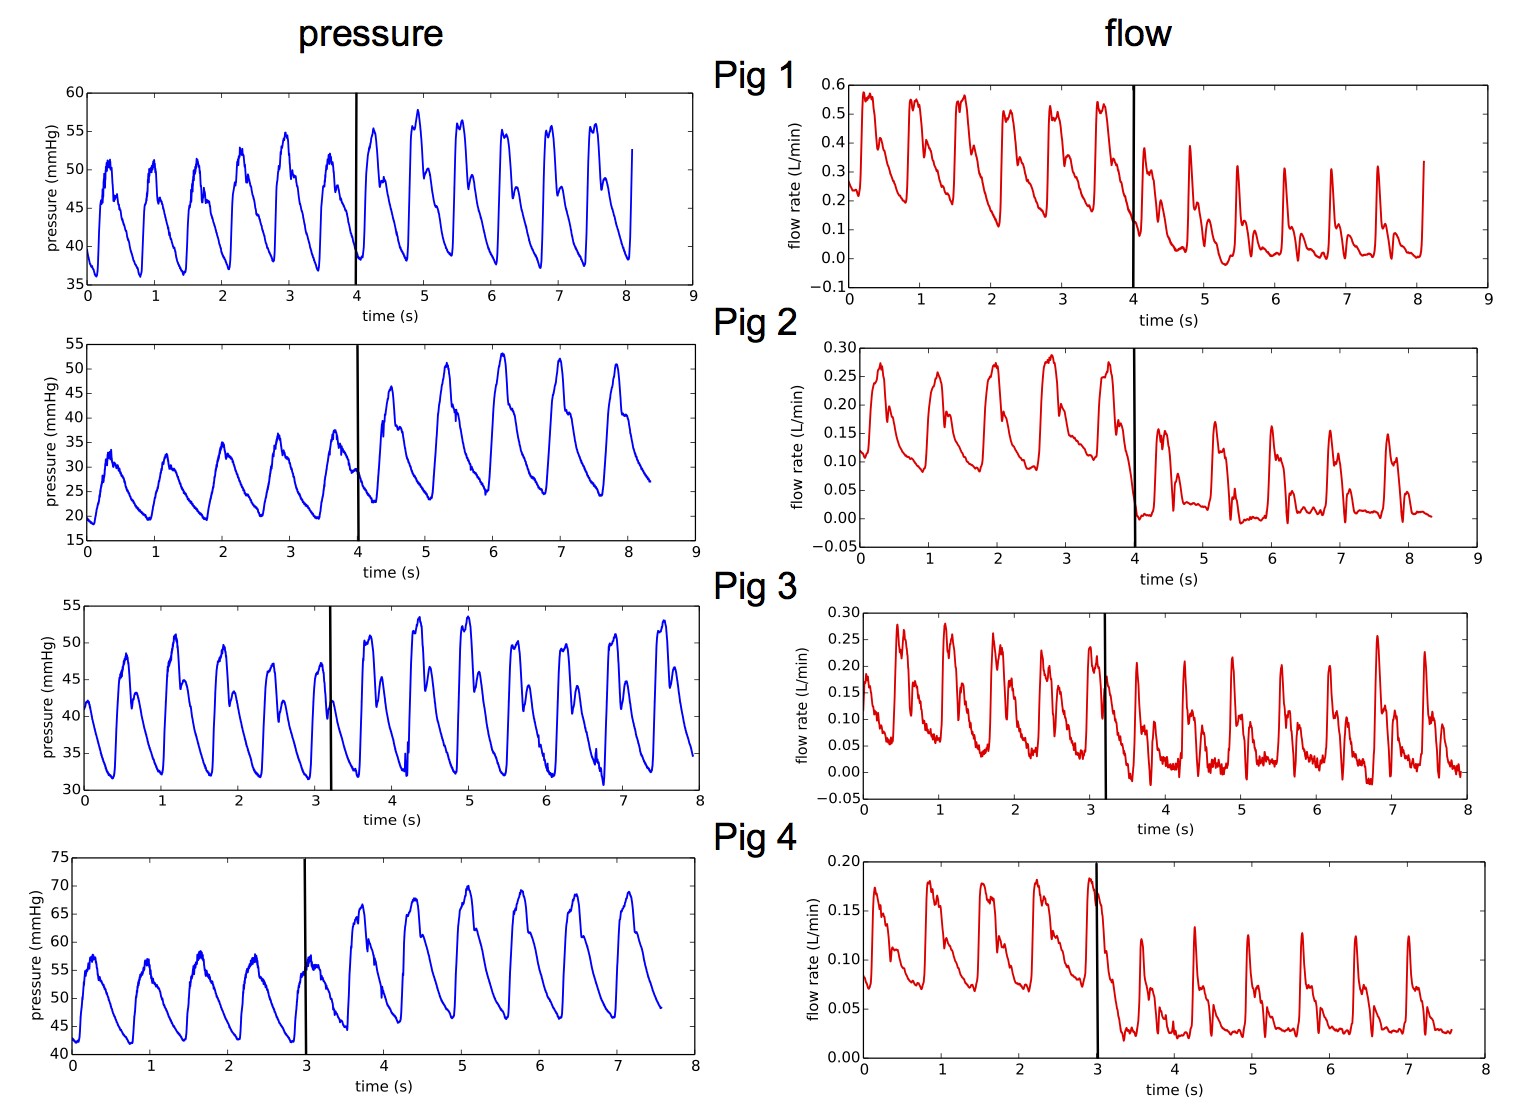 Pressure and flow measurements in hepatic artery at the resection time for 4 different animals black lines indicate the resection time